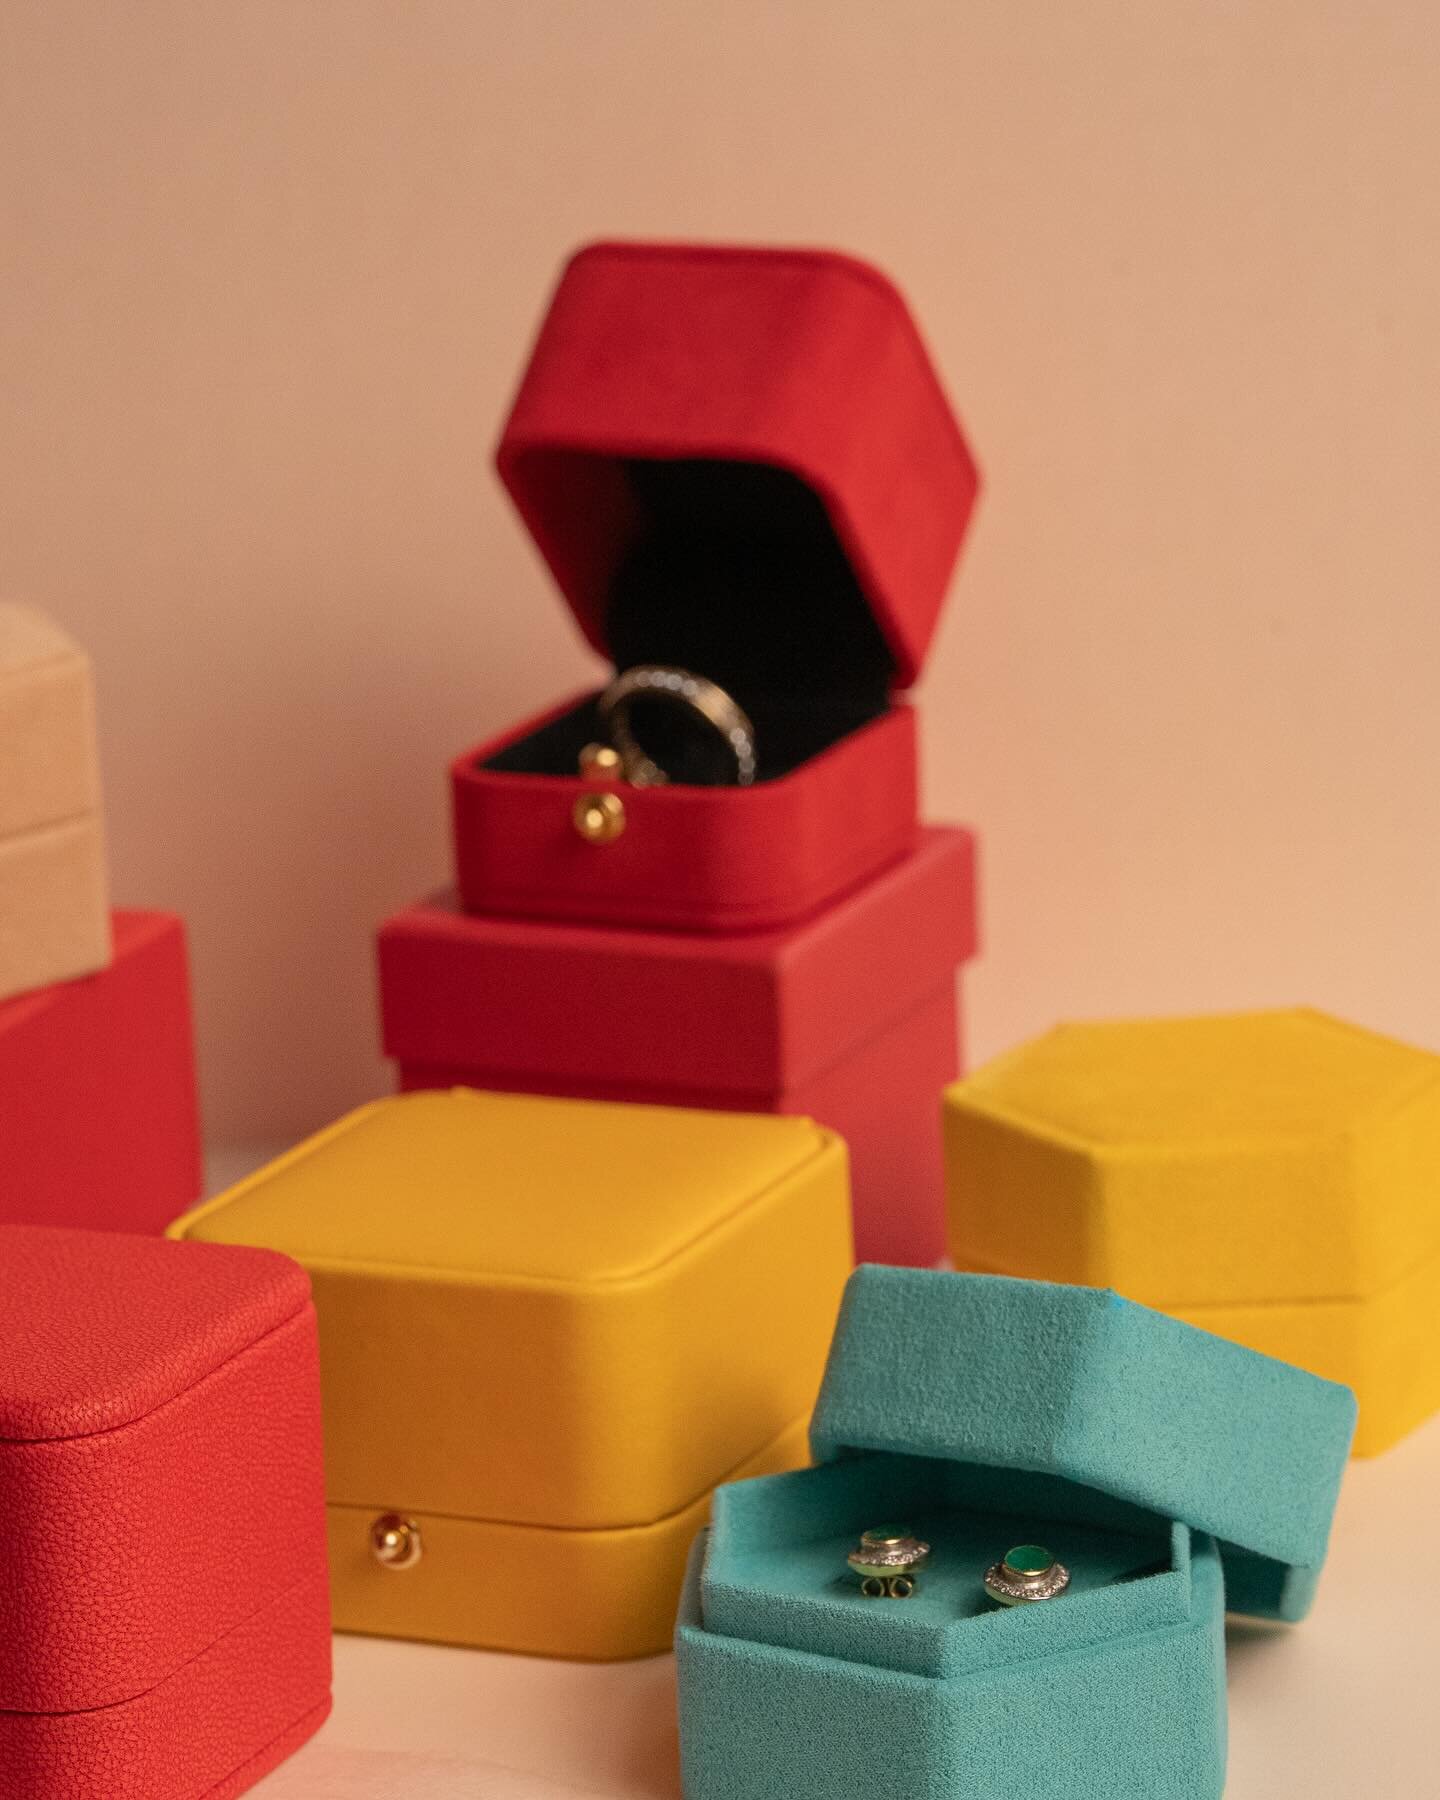 A colorful pic today to lighten up your day 🤍💛❤️💚💜🩷🩵

#bespokeboxes #packagingdesign #packagingideas #estuchespersonalizados #finejewelry #finejewellery #jewellerypackaging #spring #totbag #bespokeideas